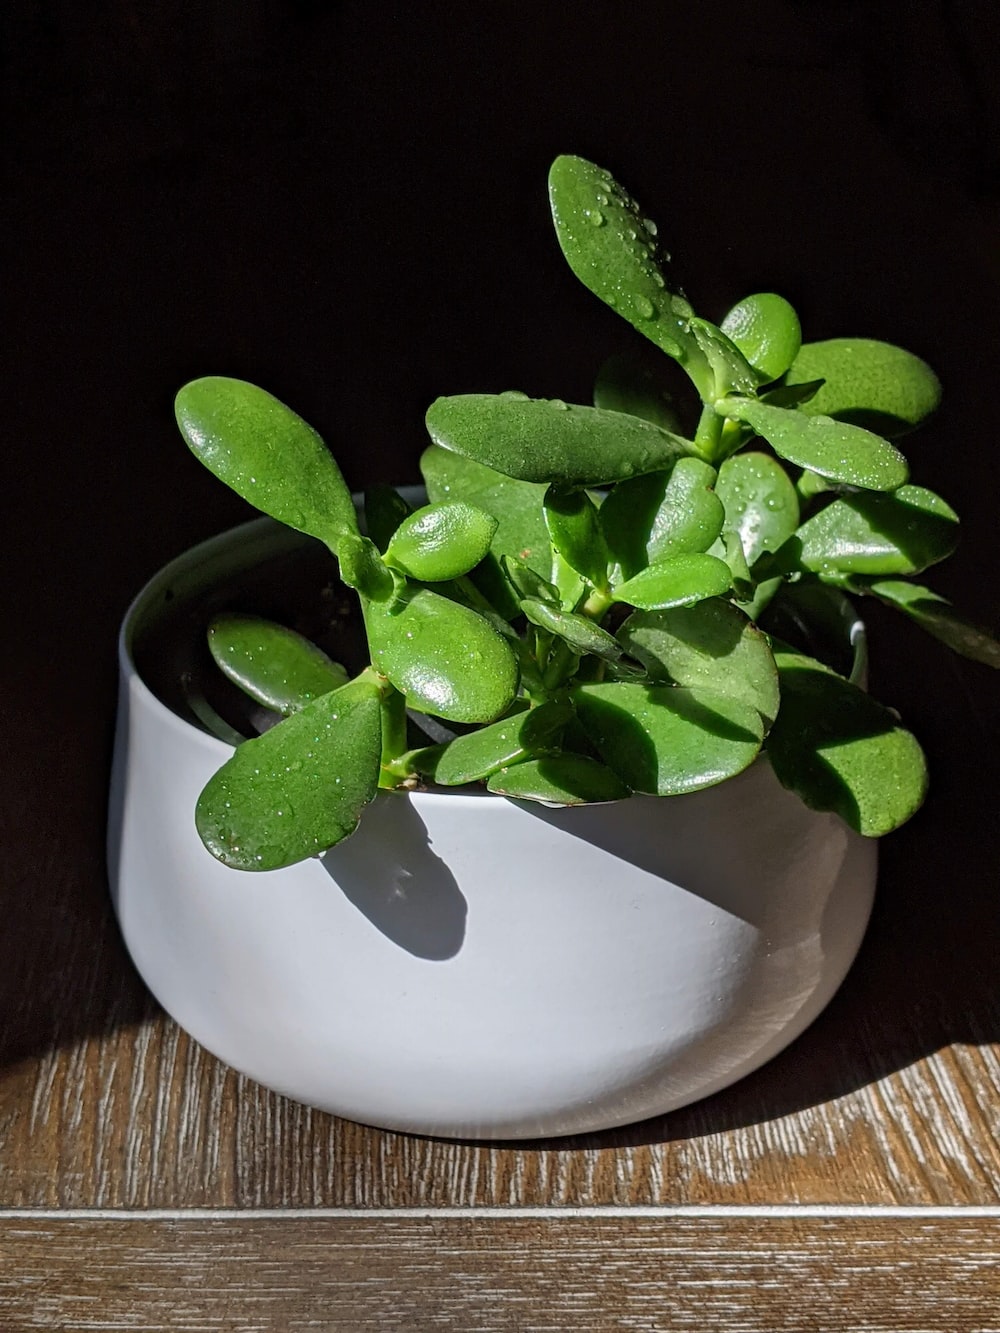 Does jade plant attract money?